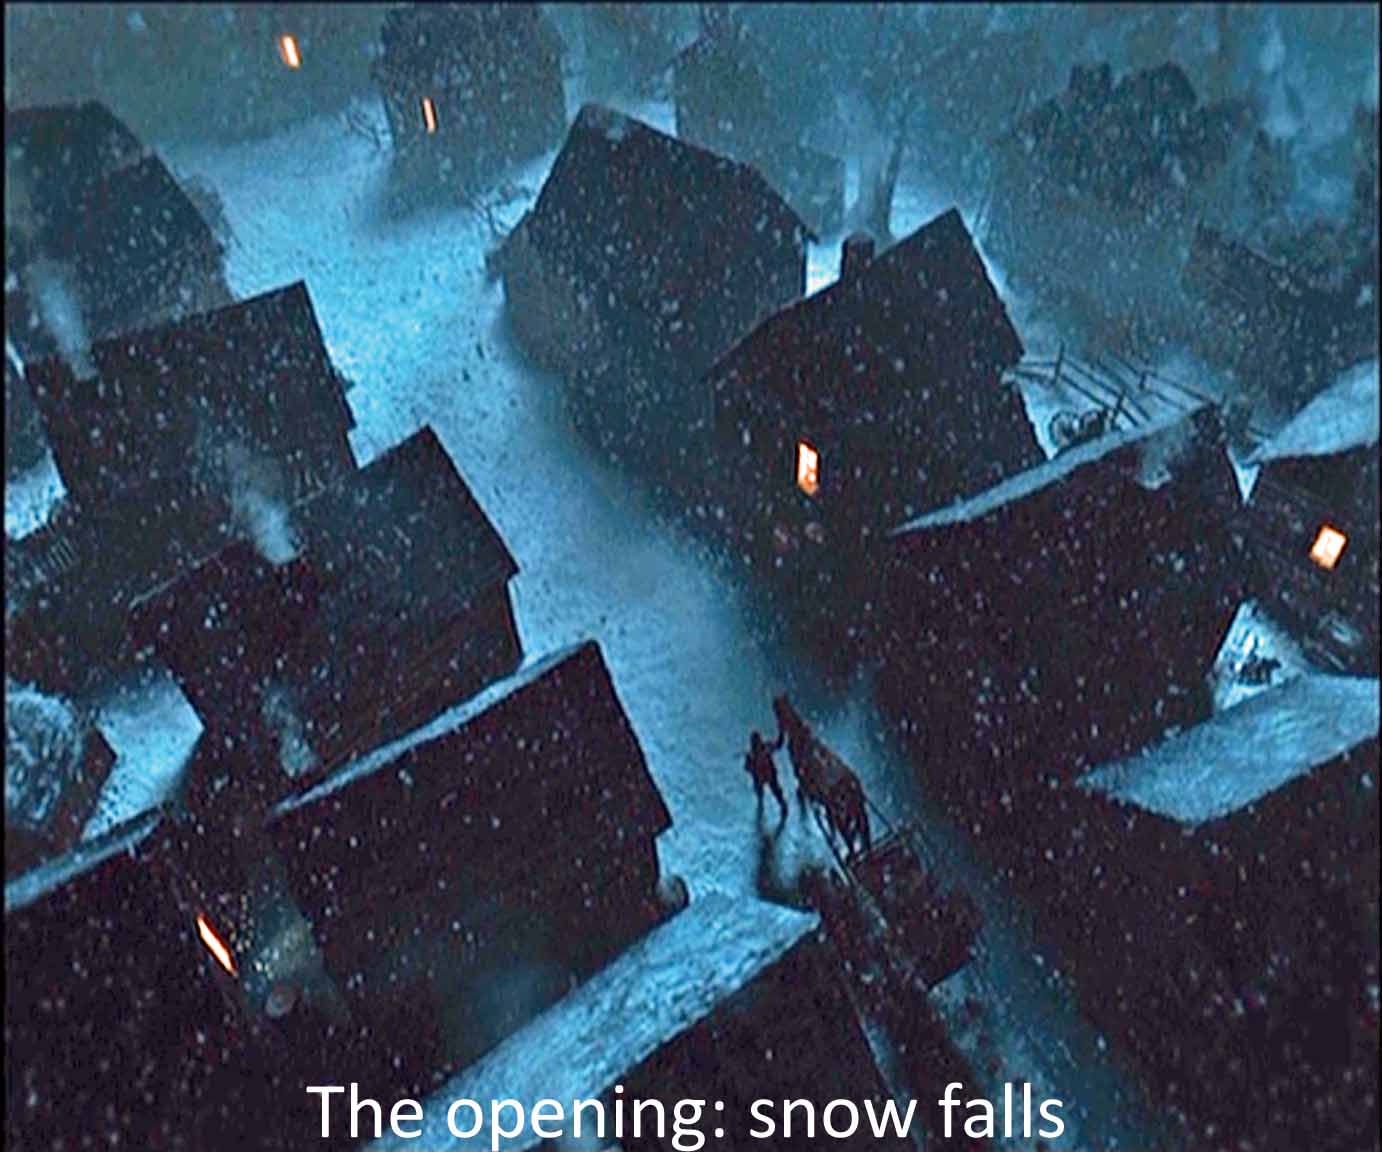 The opening: snow falls